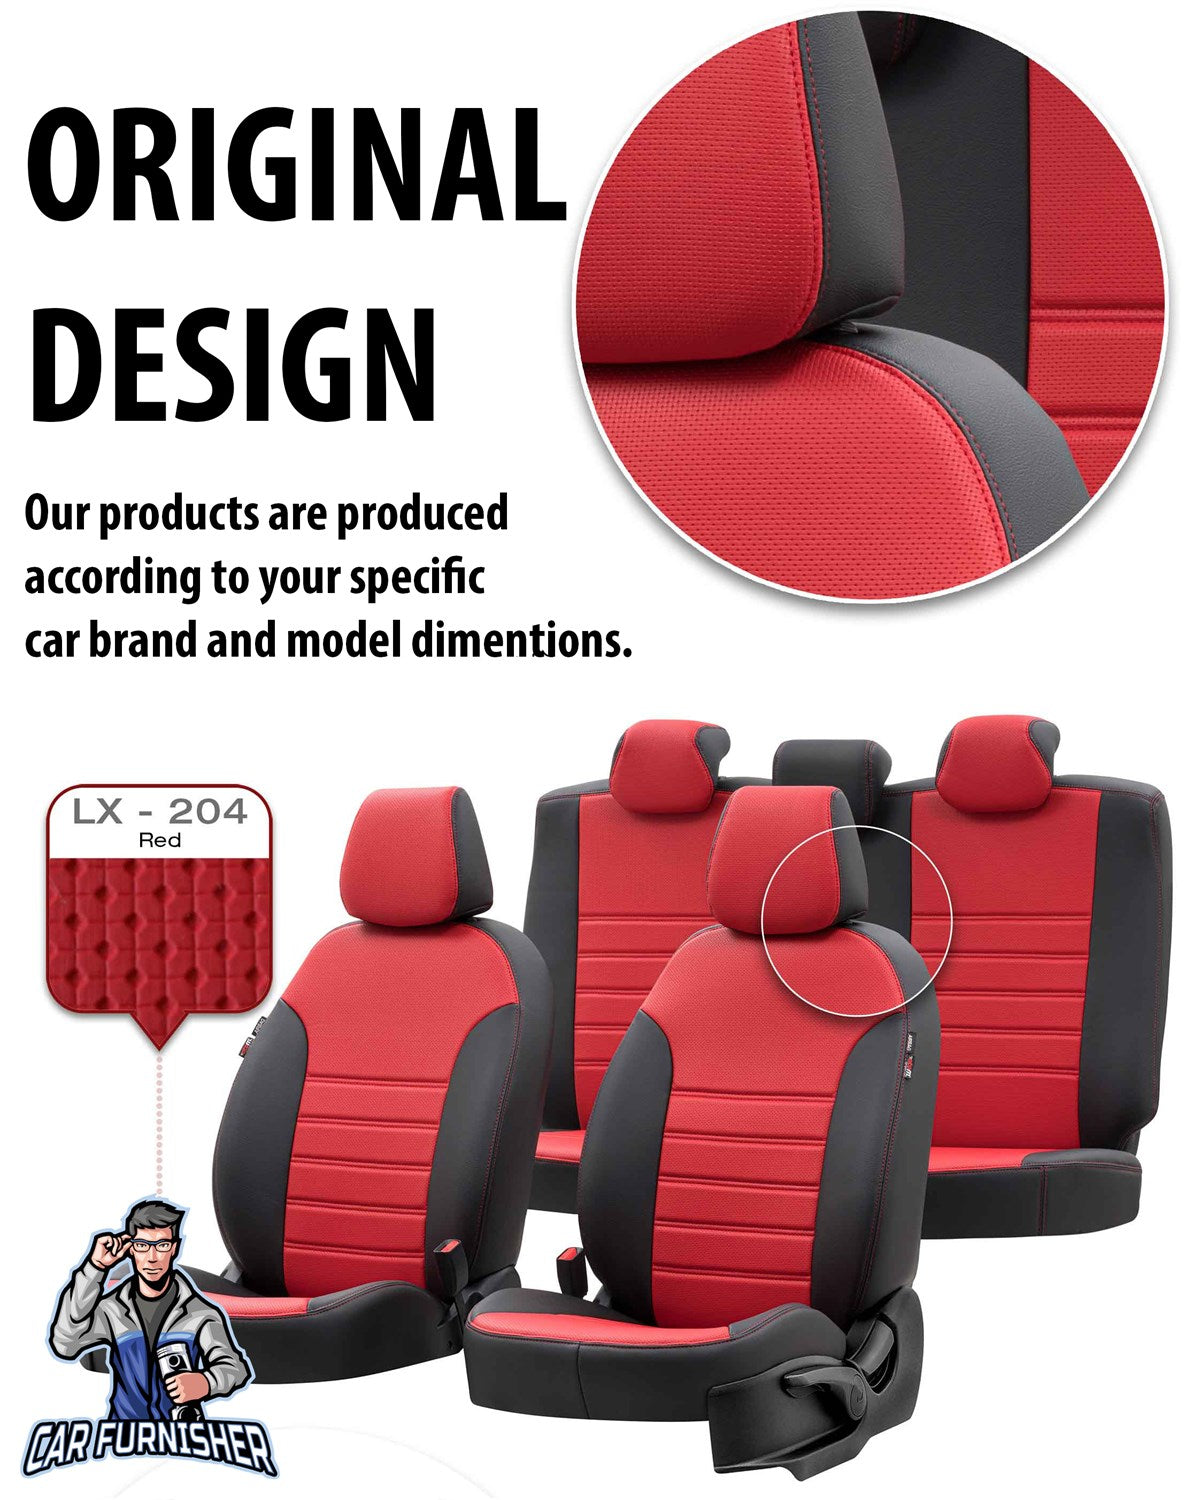 Toyota Hilux Seat Cover New York Leather Design Red Leather